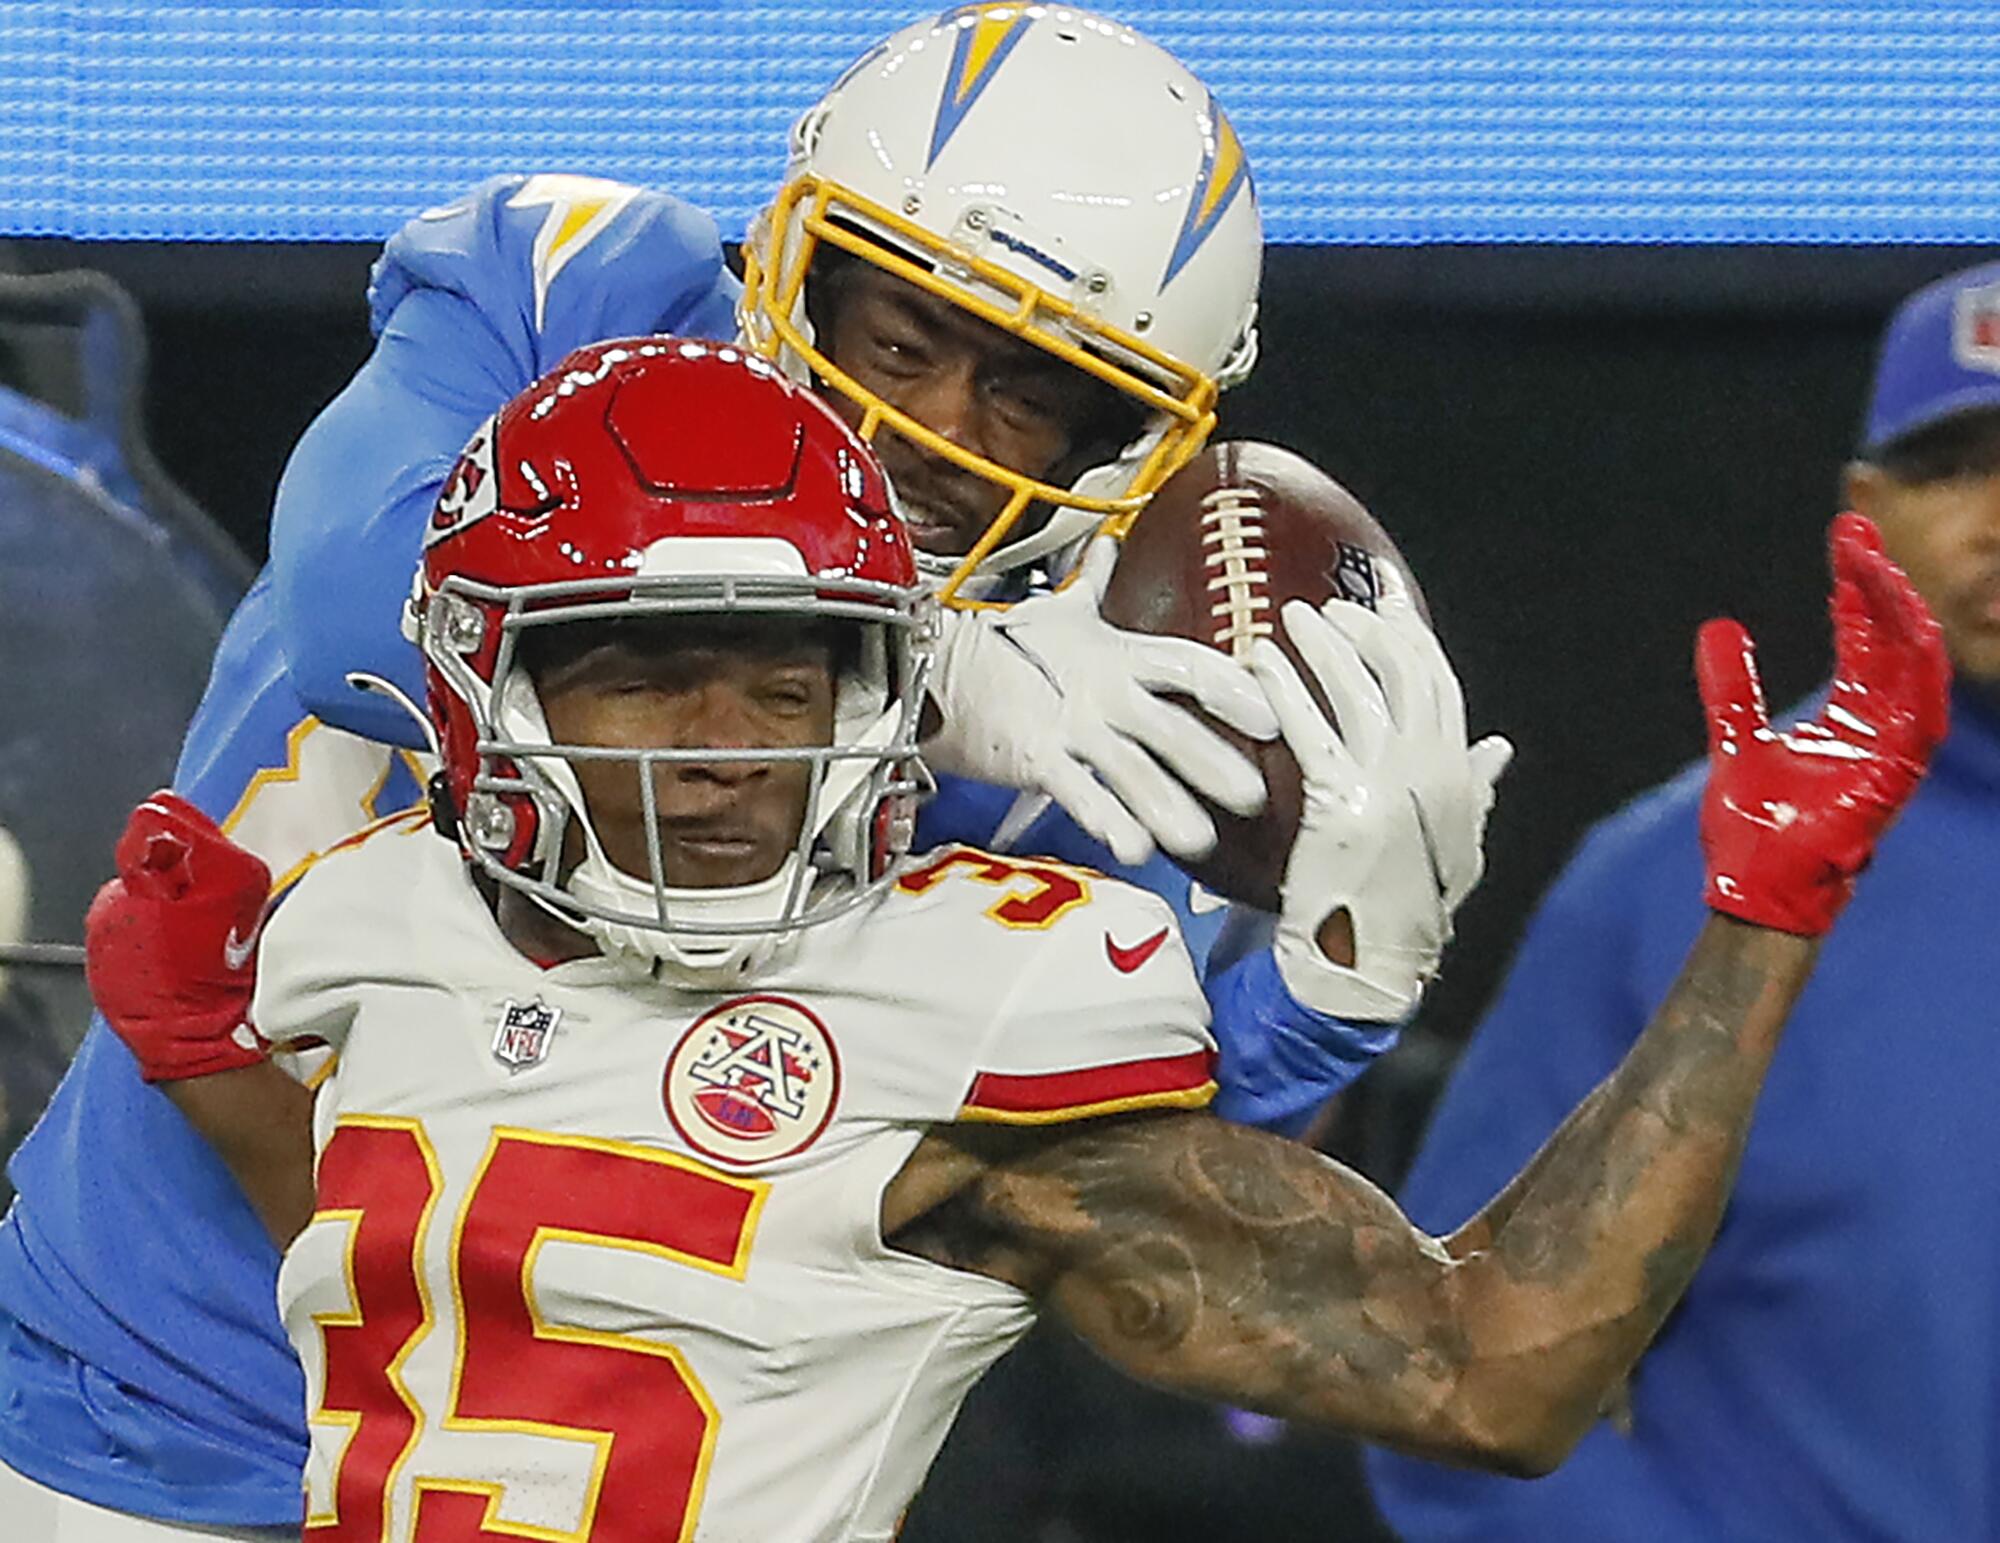 Photos: Chiefs surge late to defeat Chargers in overtime - Los Angeles Times